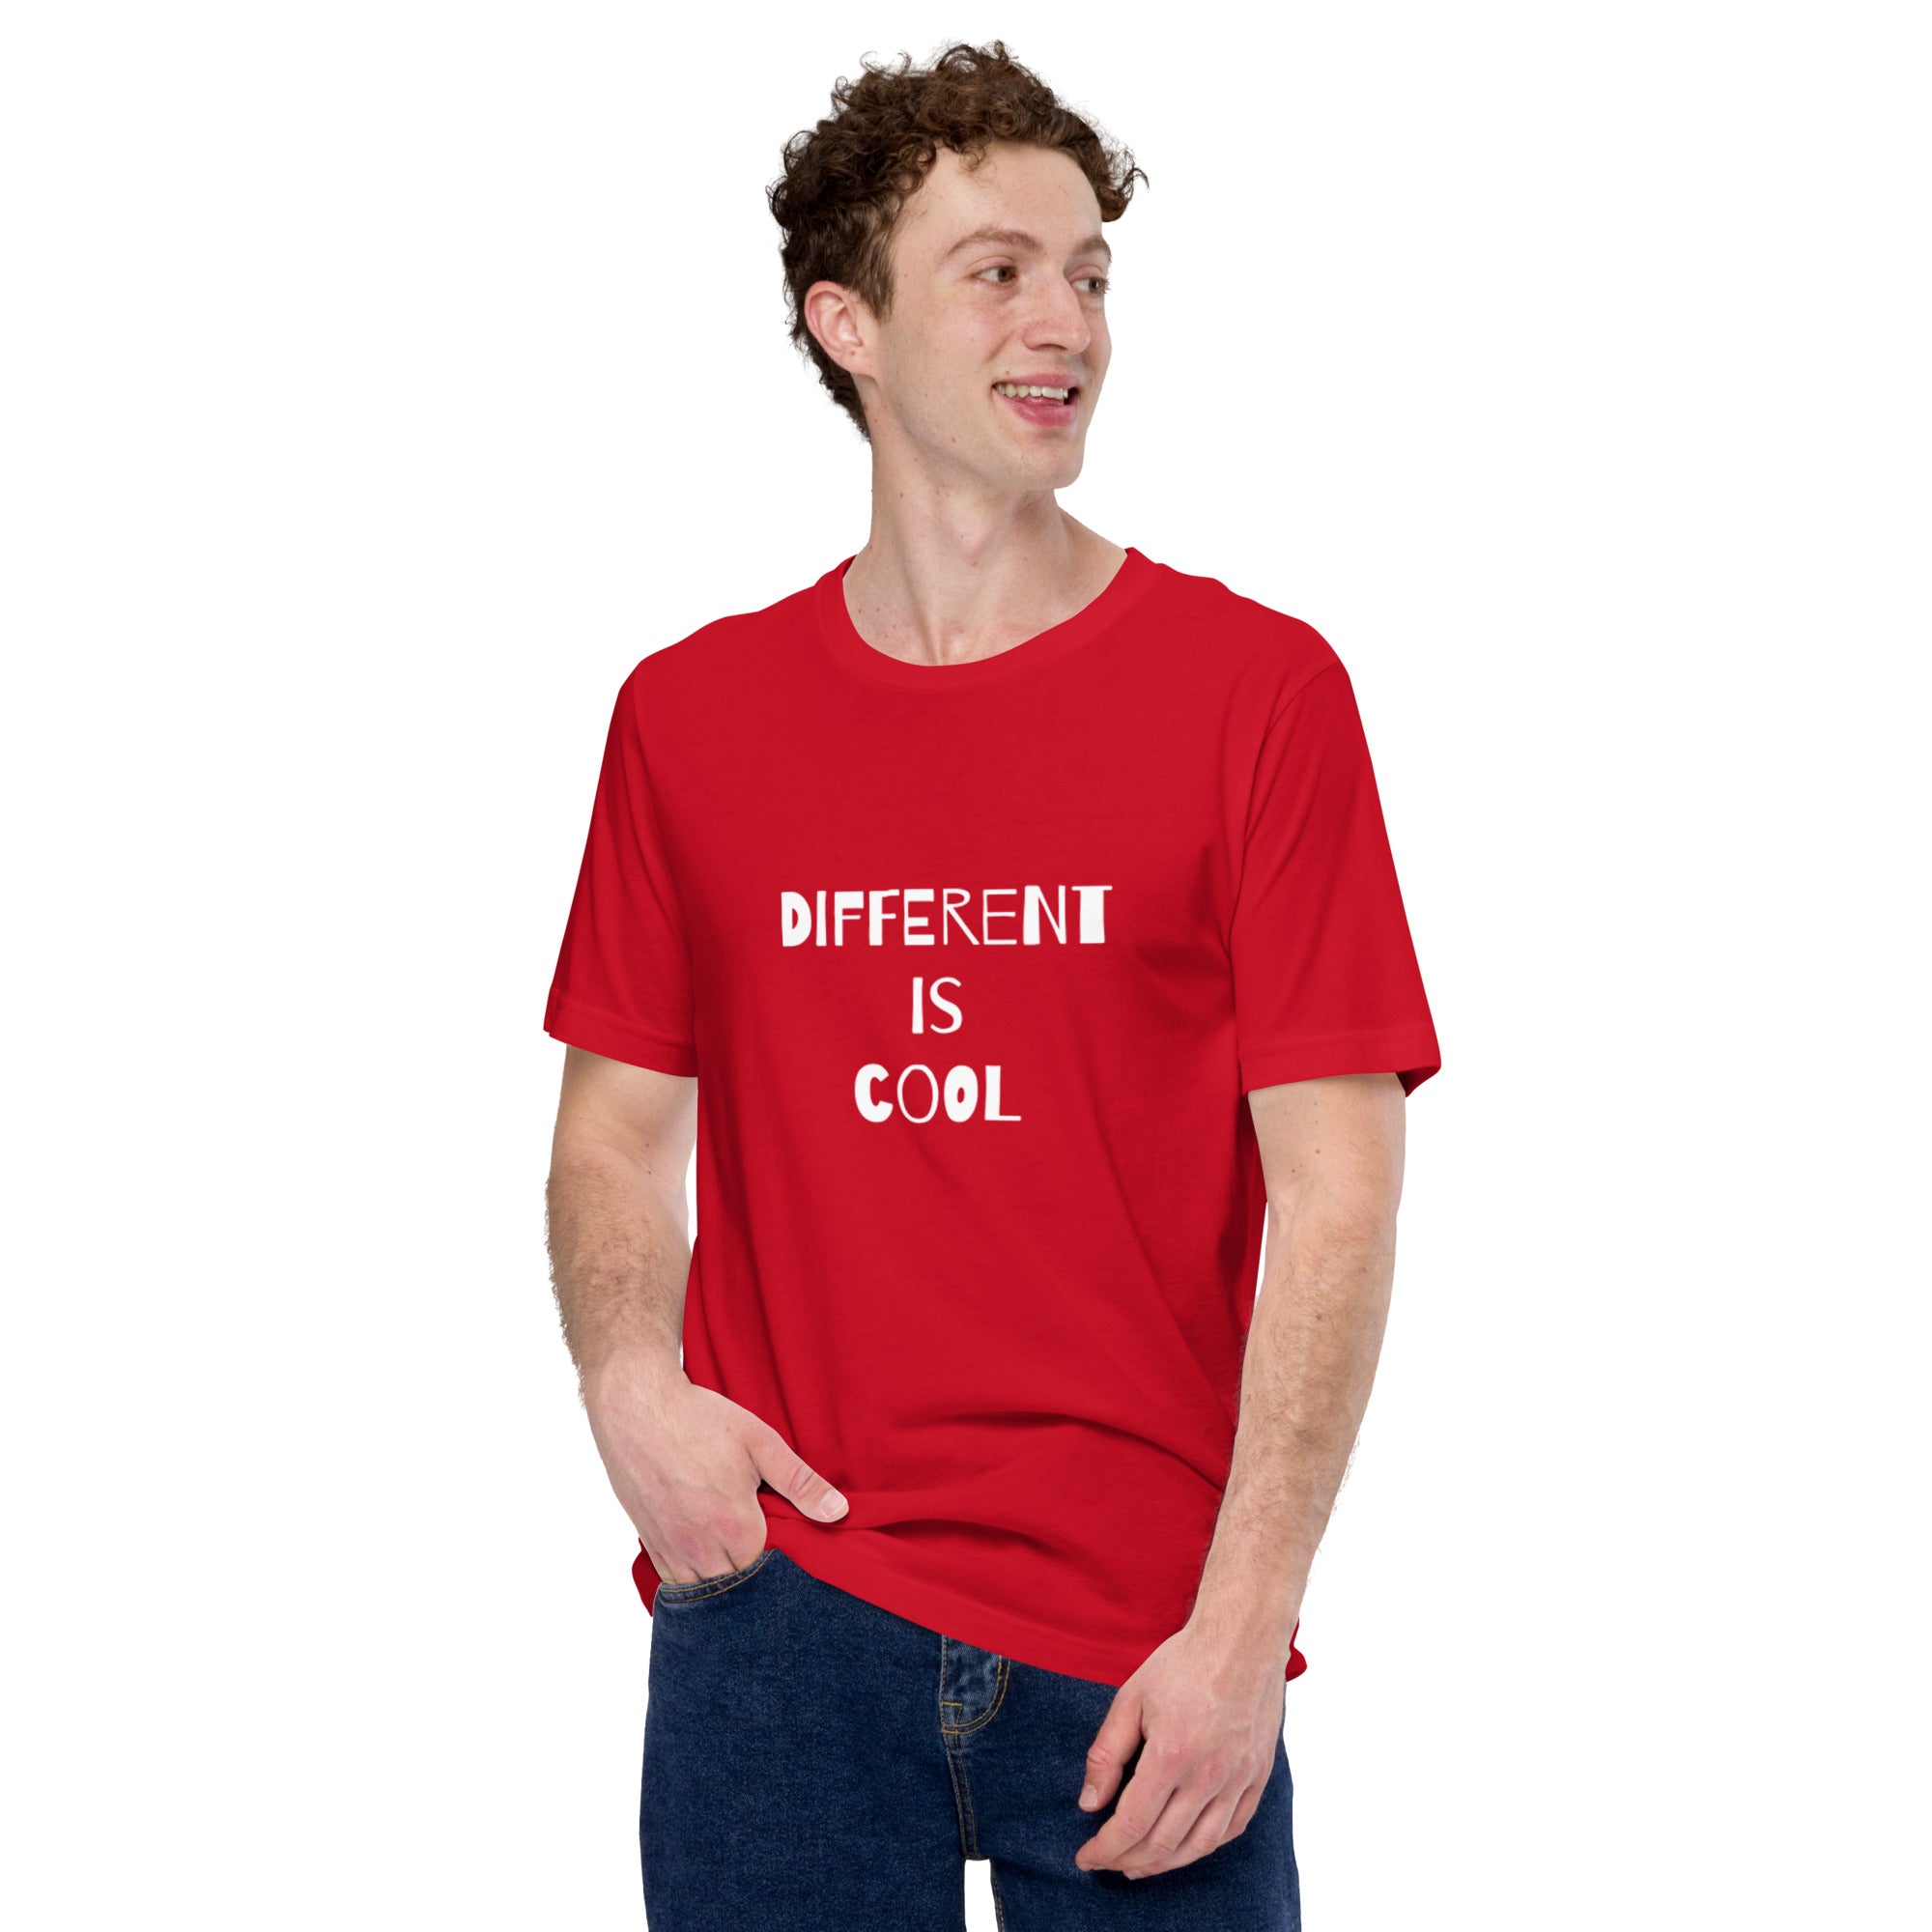 Adult Unisex T-shirt - Different is Cool